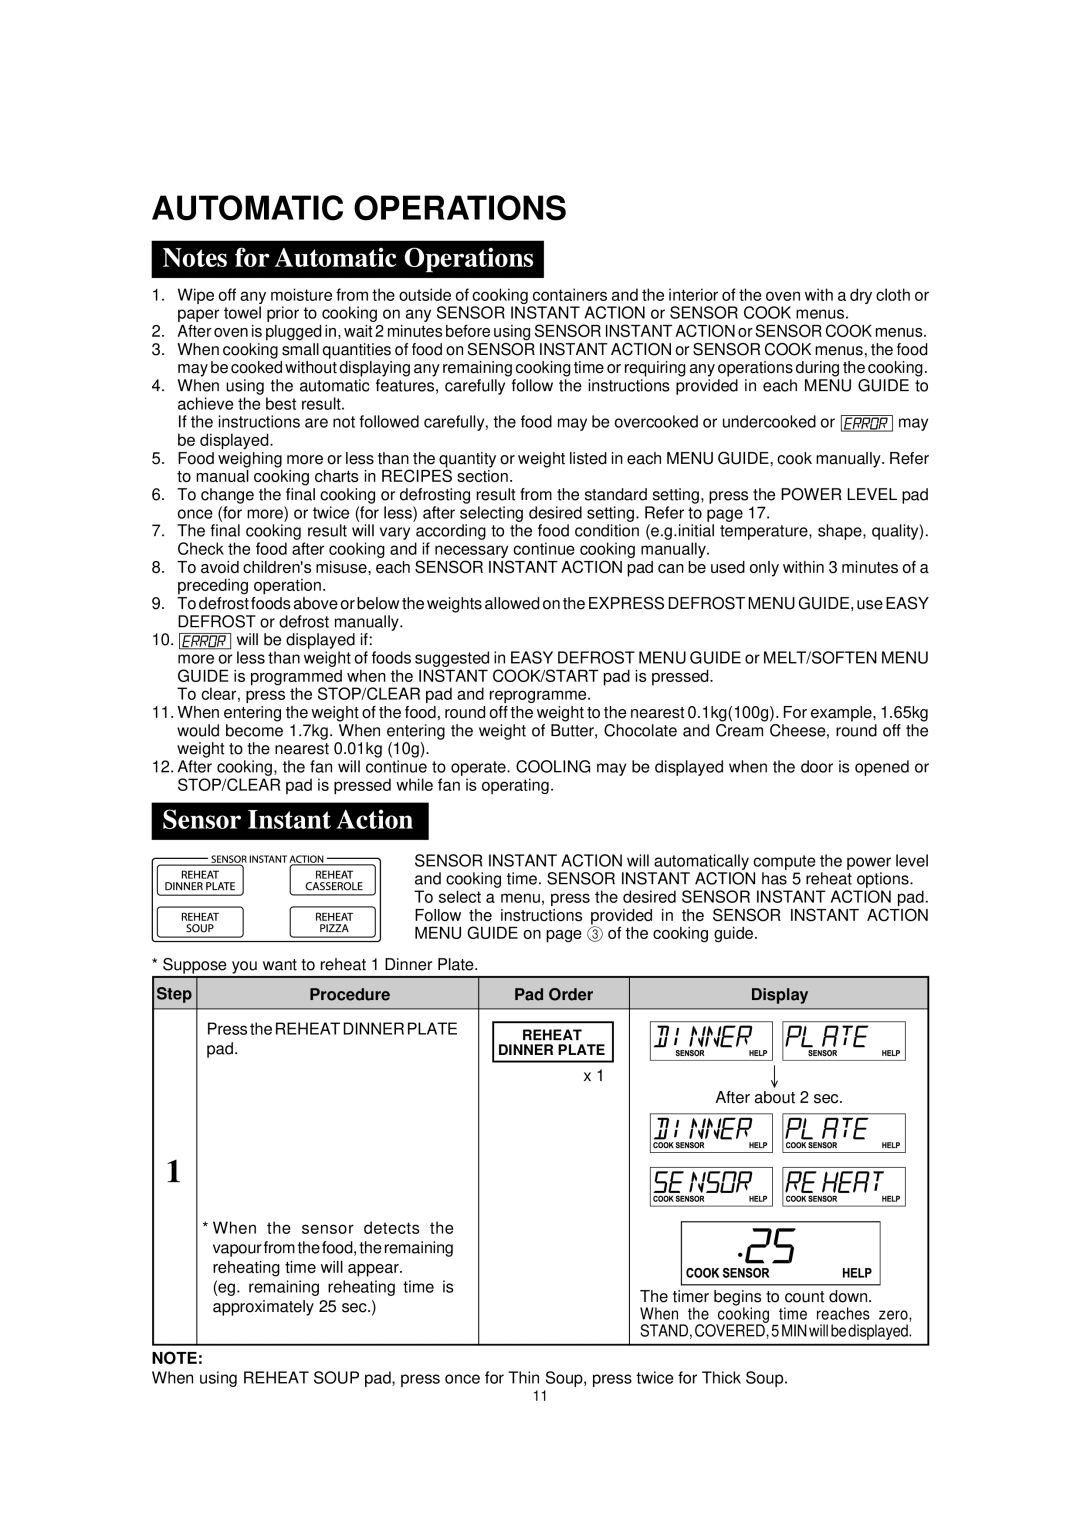 Sharp R395Y O/M, R-395Y(S) operation manual Notes for Automatic Operations, Sensor Instant Action 